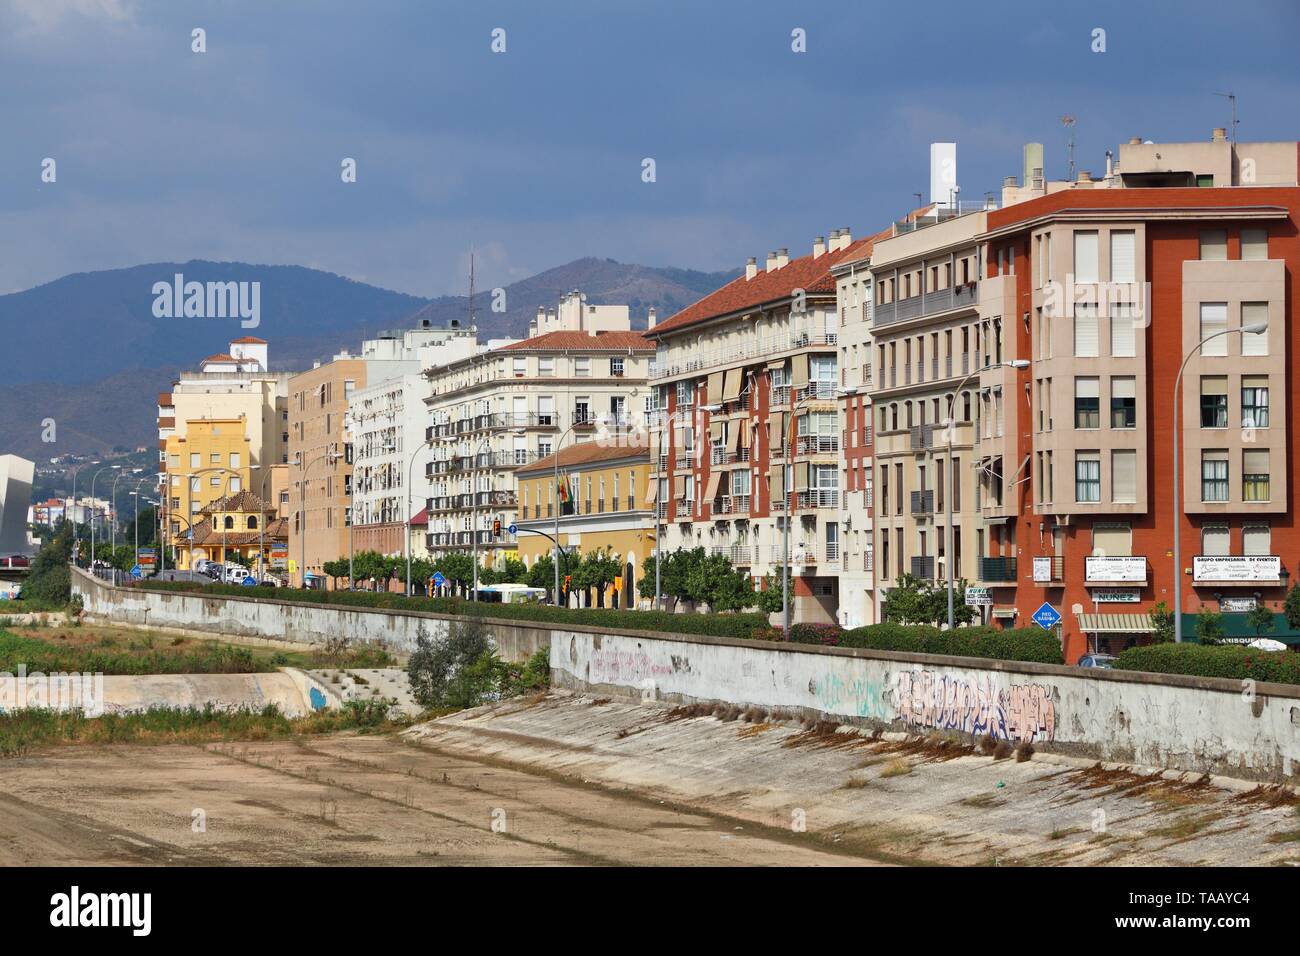 MALAGA, SPAIN - OCTOBER 4, 2014: Guadalmedina river canal in Malaga, Spain. According to UNWTO Spain was visited by 68.2 million tourists in 2015. Stock Photo